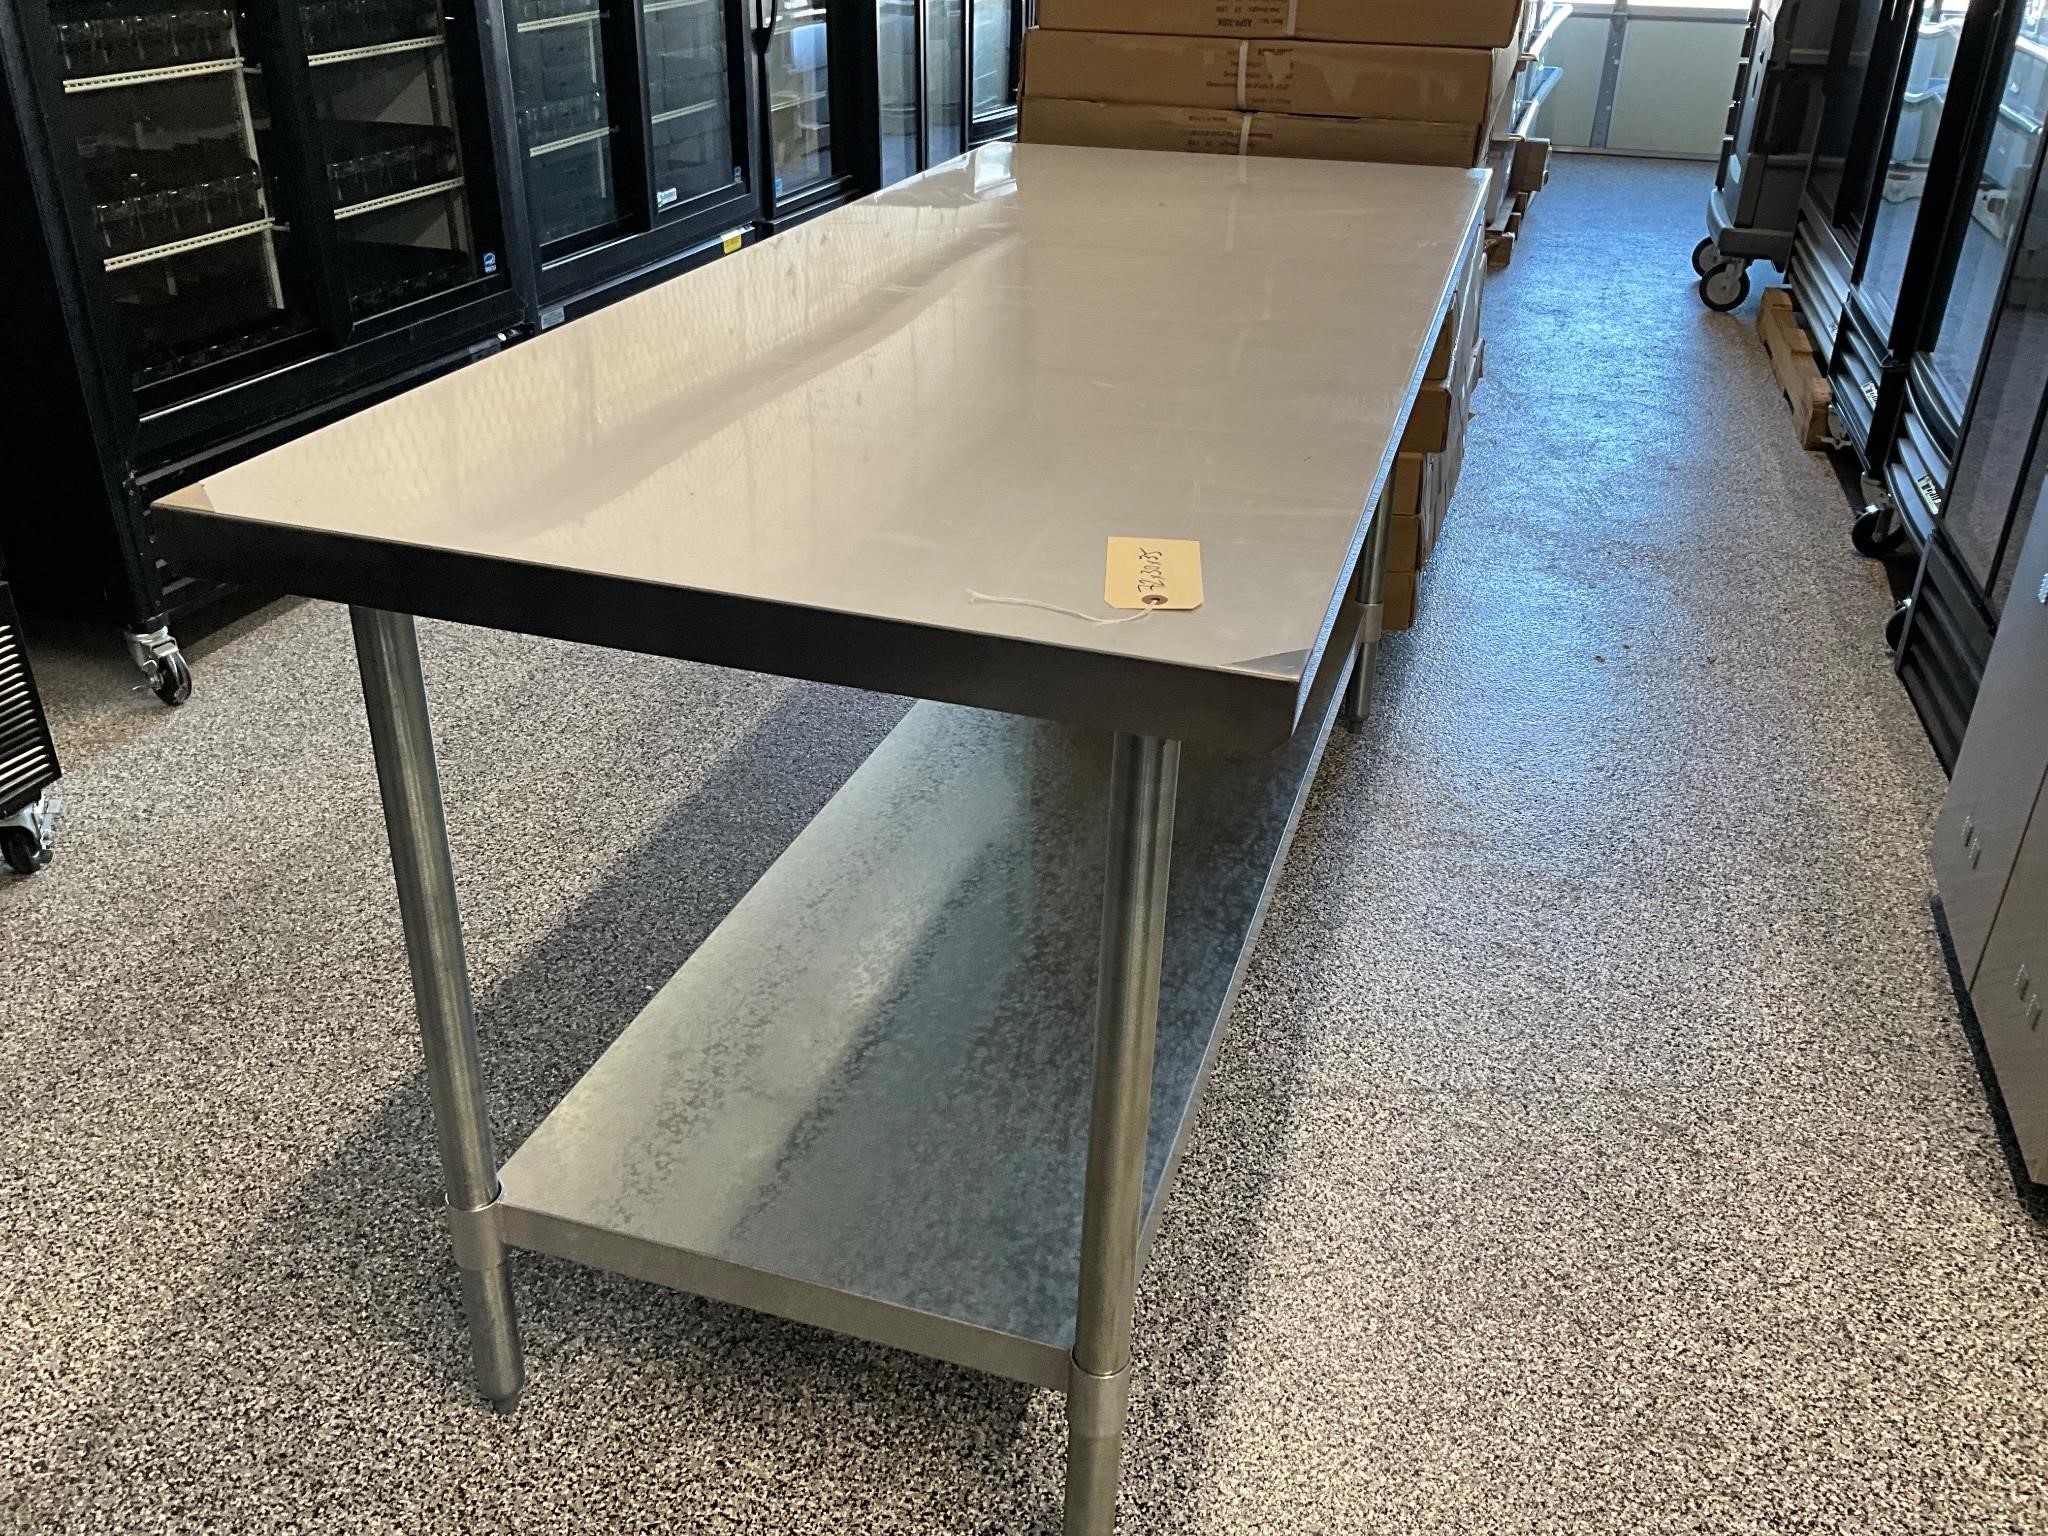 New BK 72x30 stainless steel table. New in box